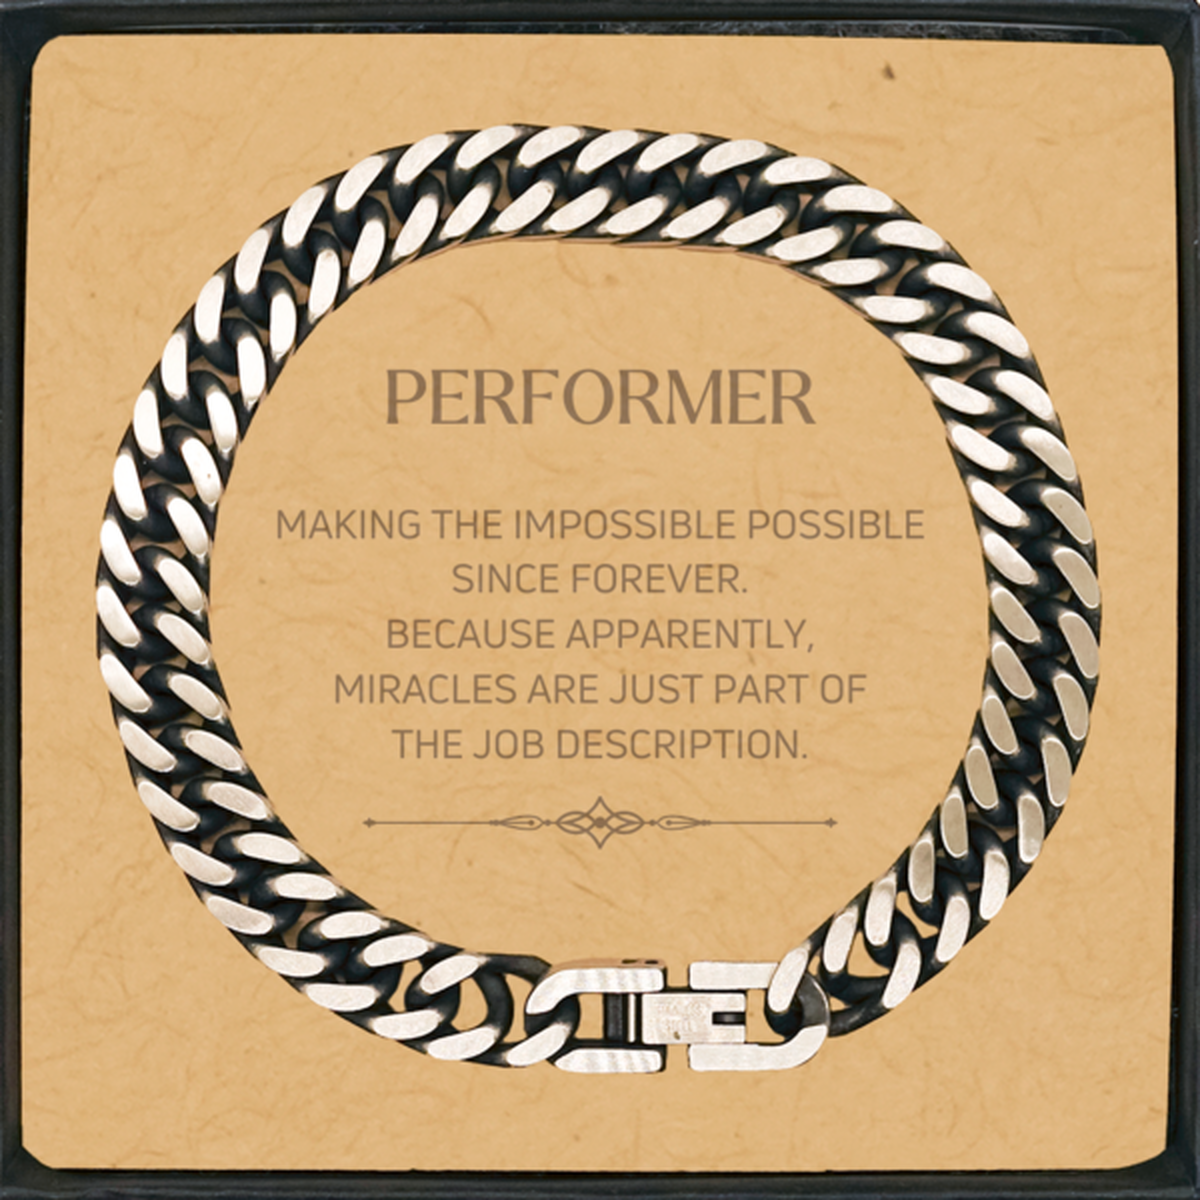 Funny Performer Gifts, Miracles are just part of the job description, Inspirational Birthday Cuban Link Chain Bracelet For Performer, Men, Women, Coworkers, Friends, Boss